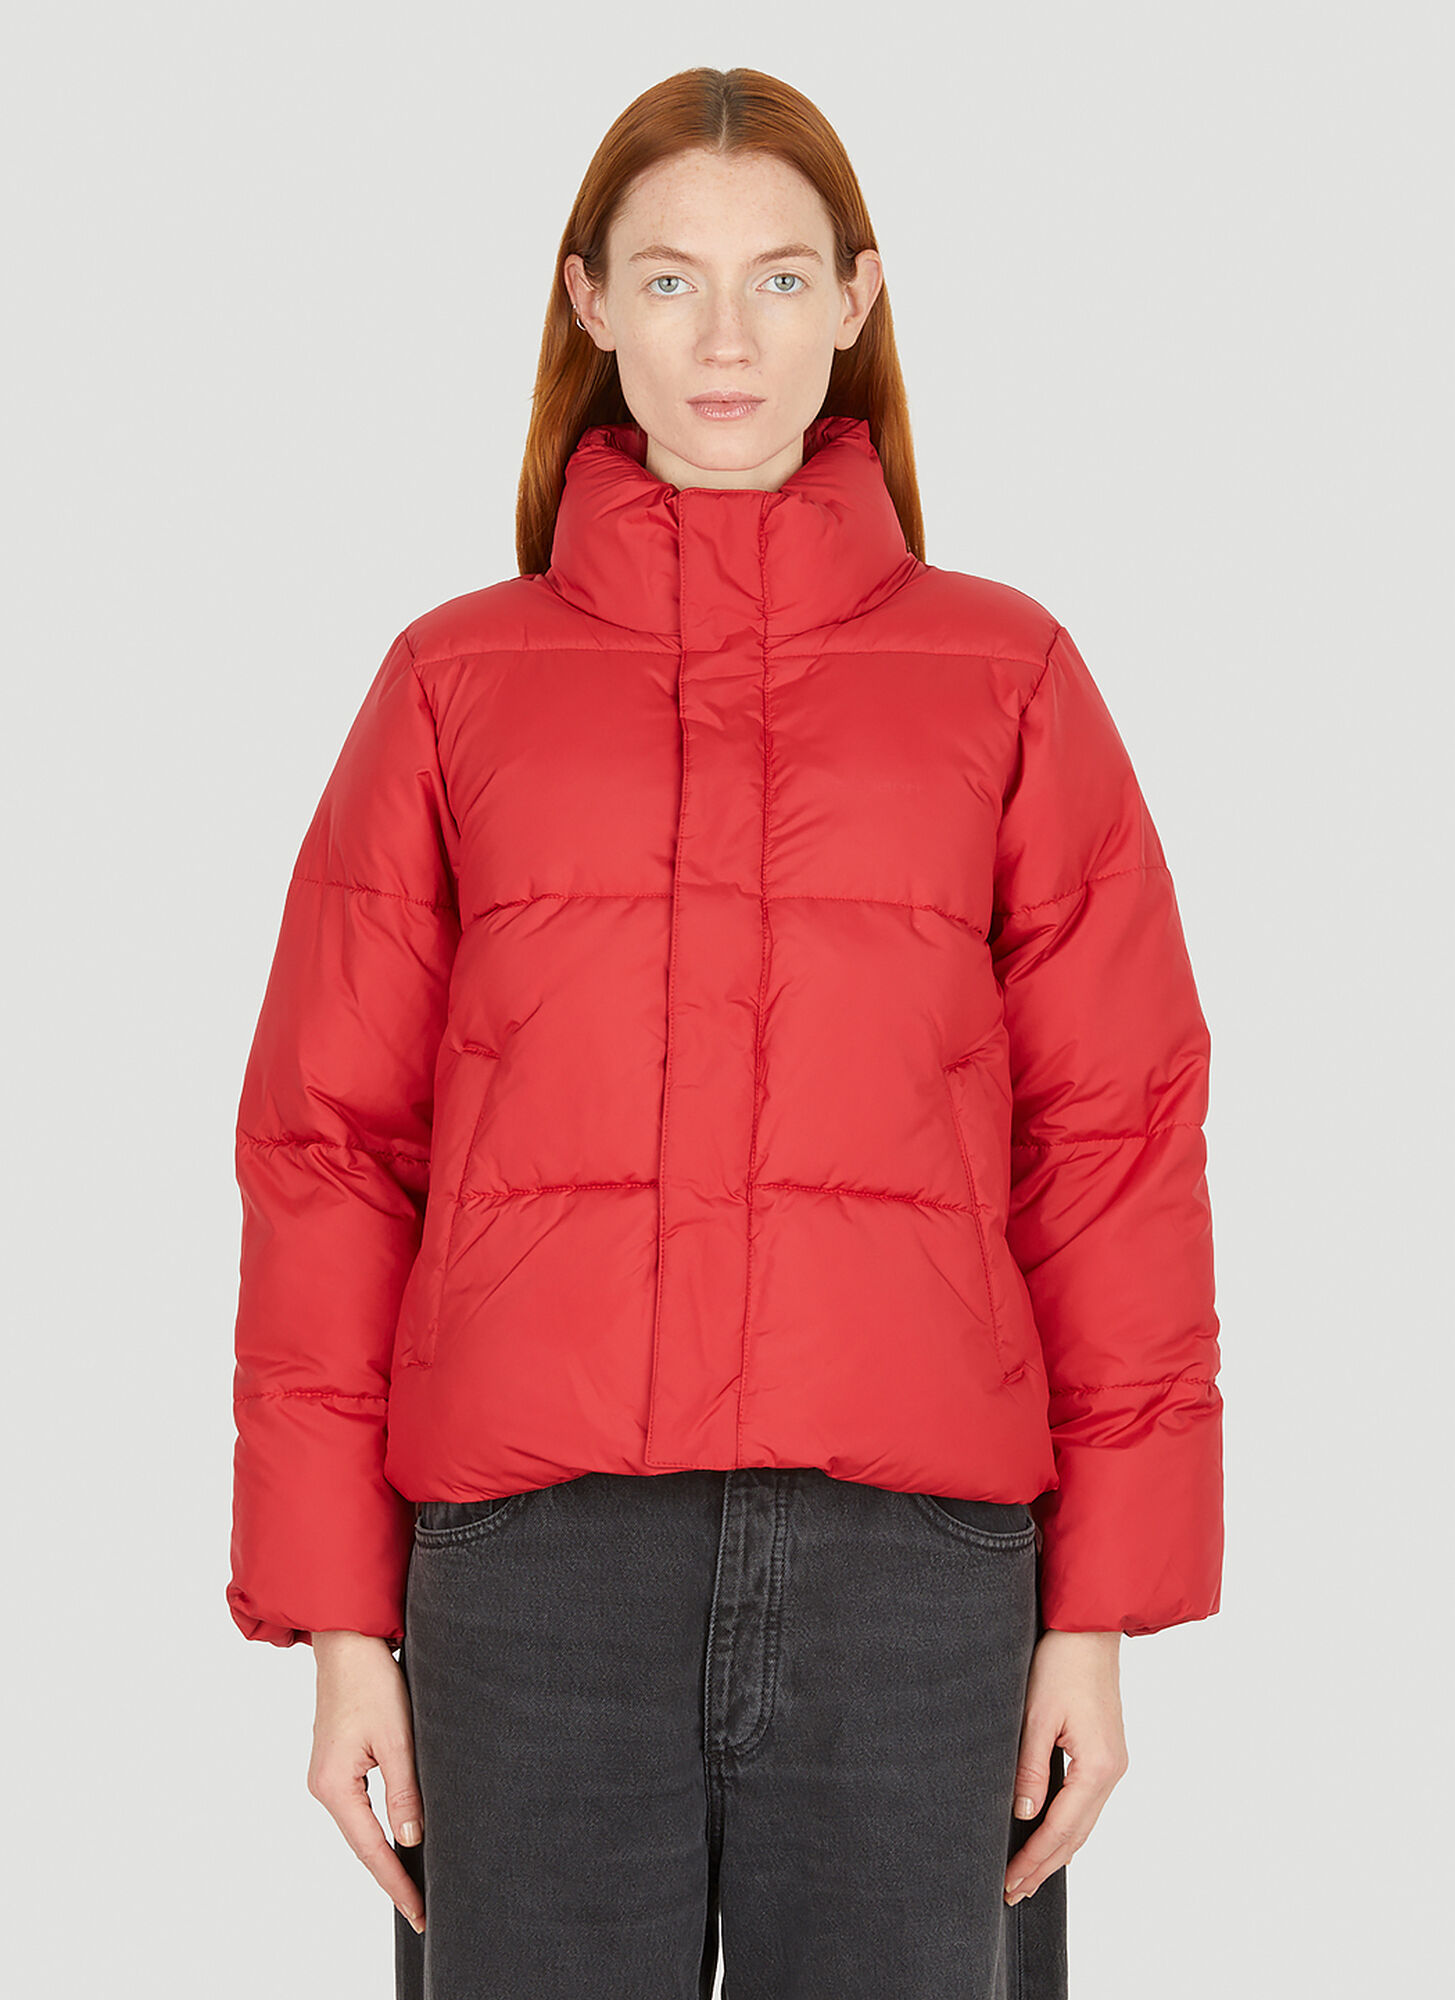 Carhartt Doville Puffer Jacket In Red